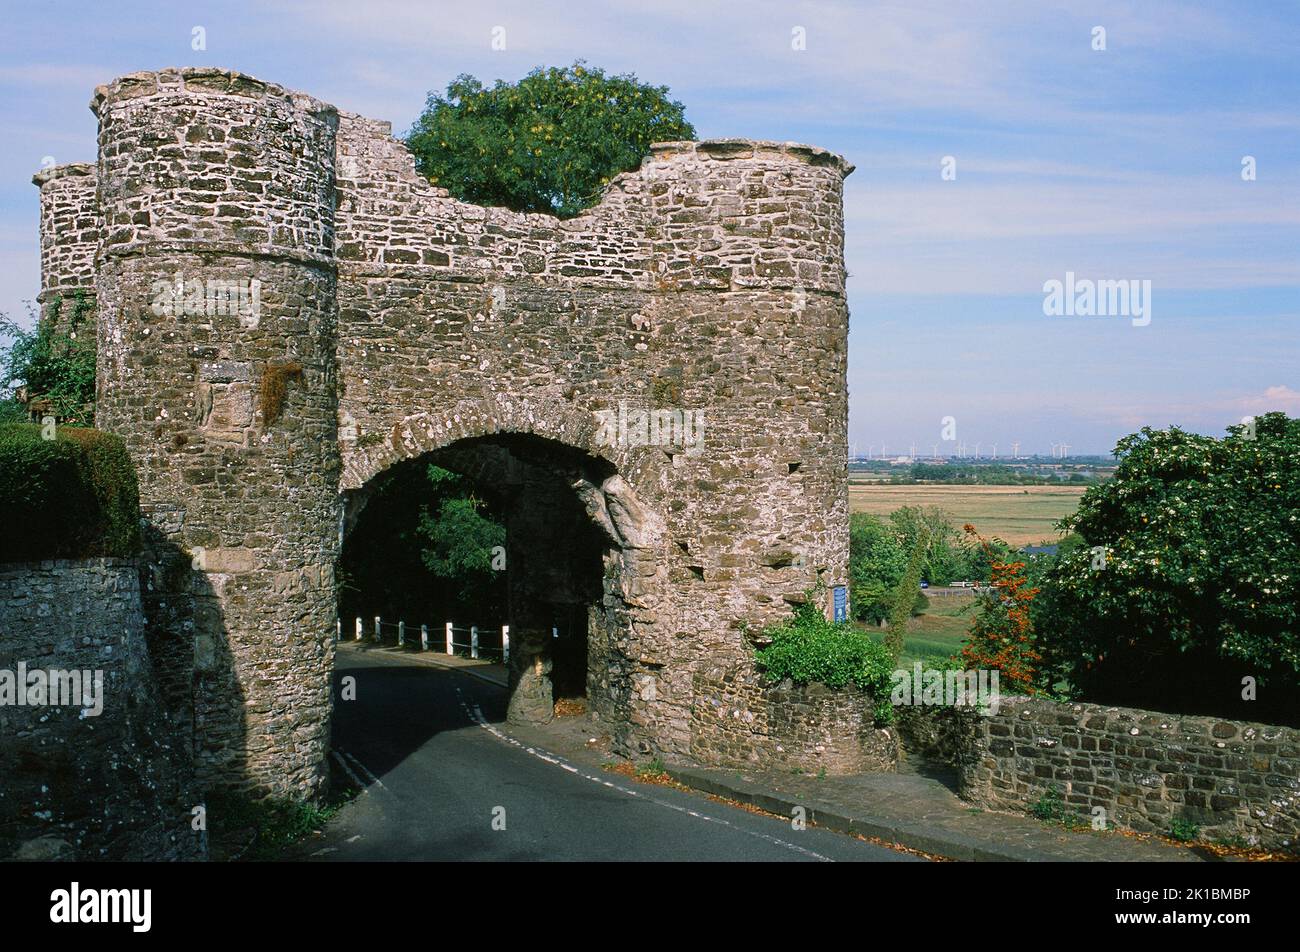 The 13th century Strand Gate at the town of Winchelsea, East Sussex, UK, with Romney Marsh in the background Stock Photo